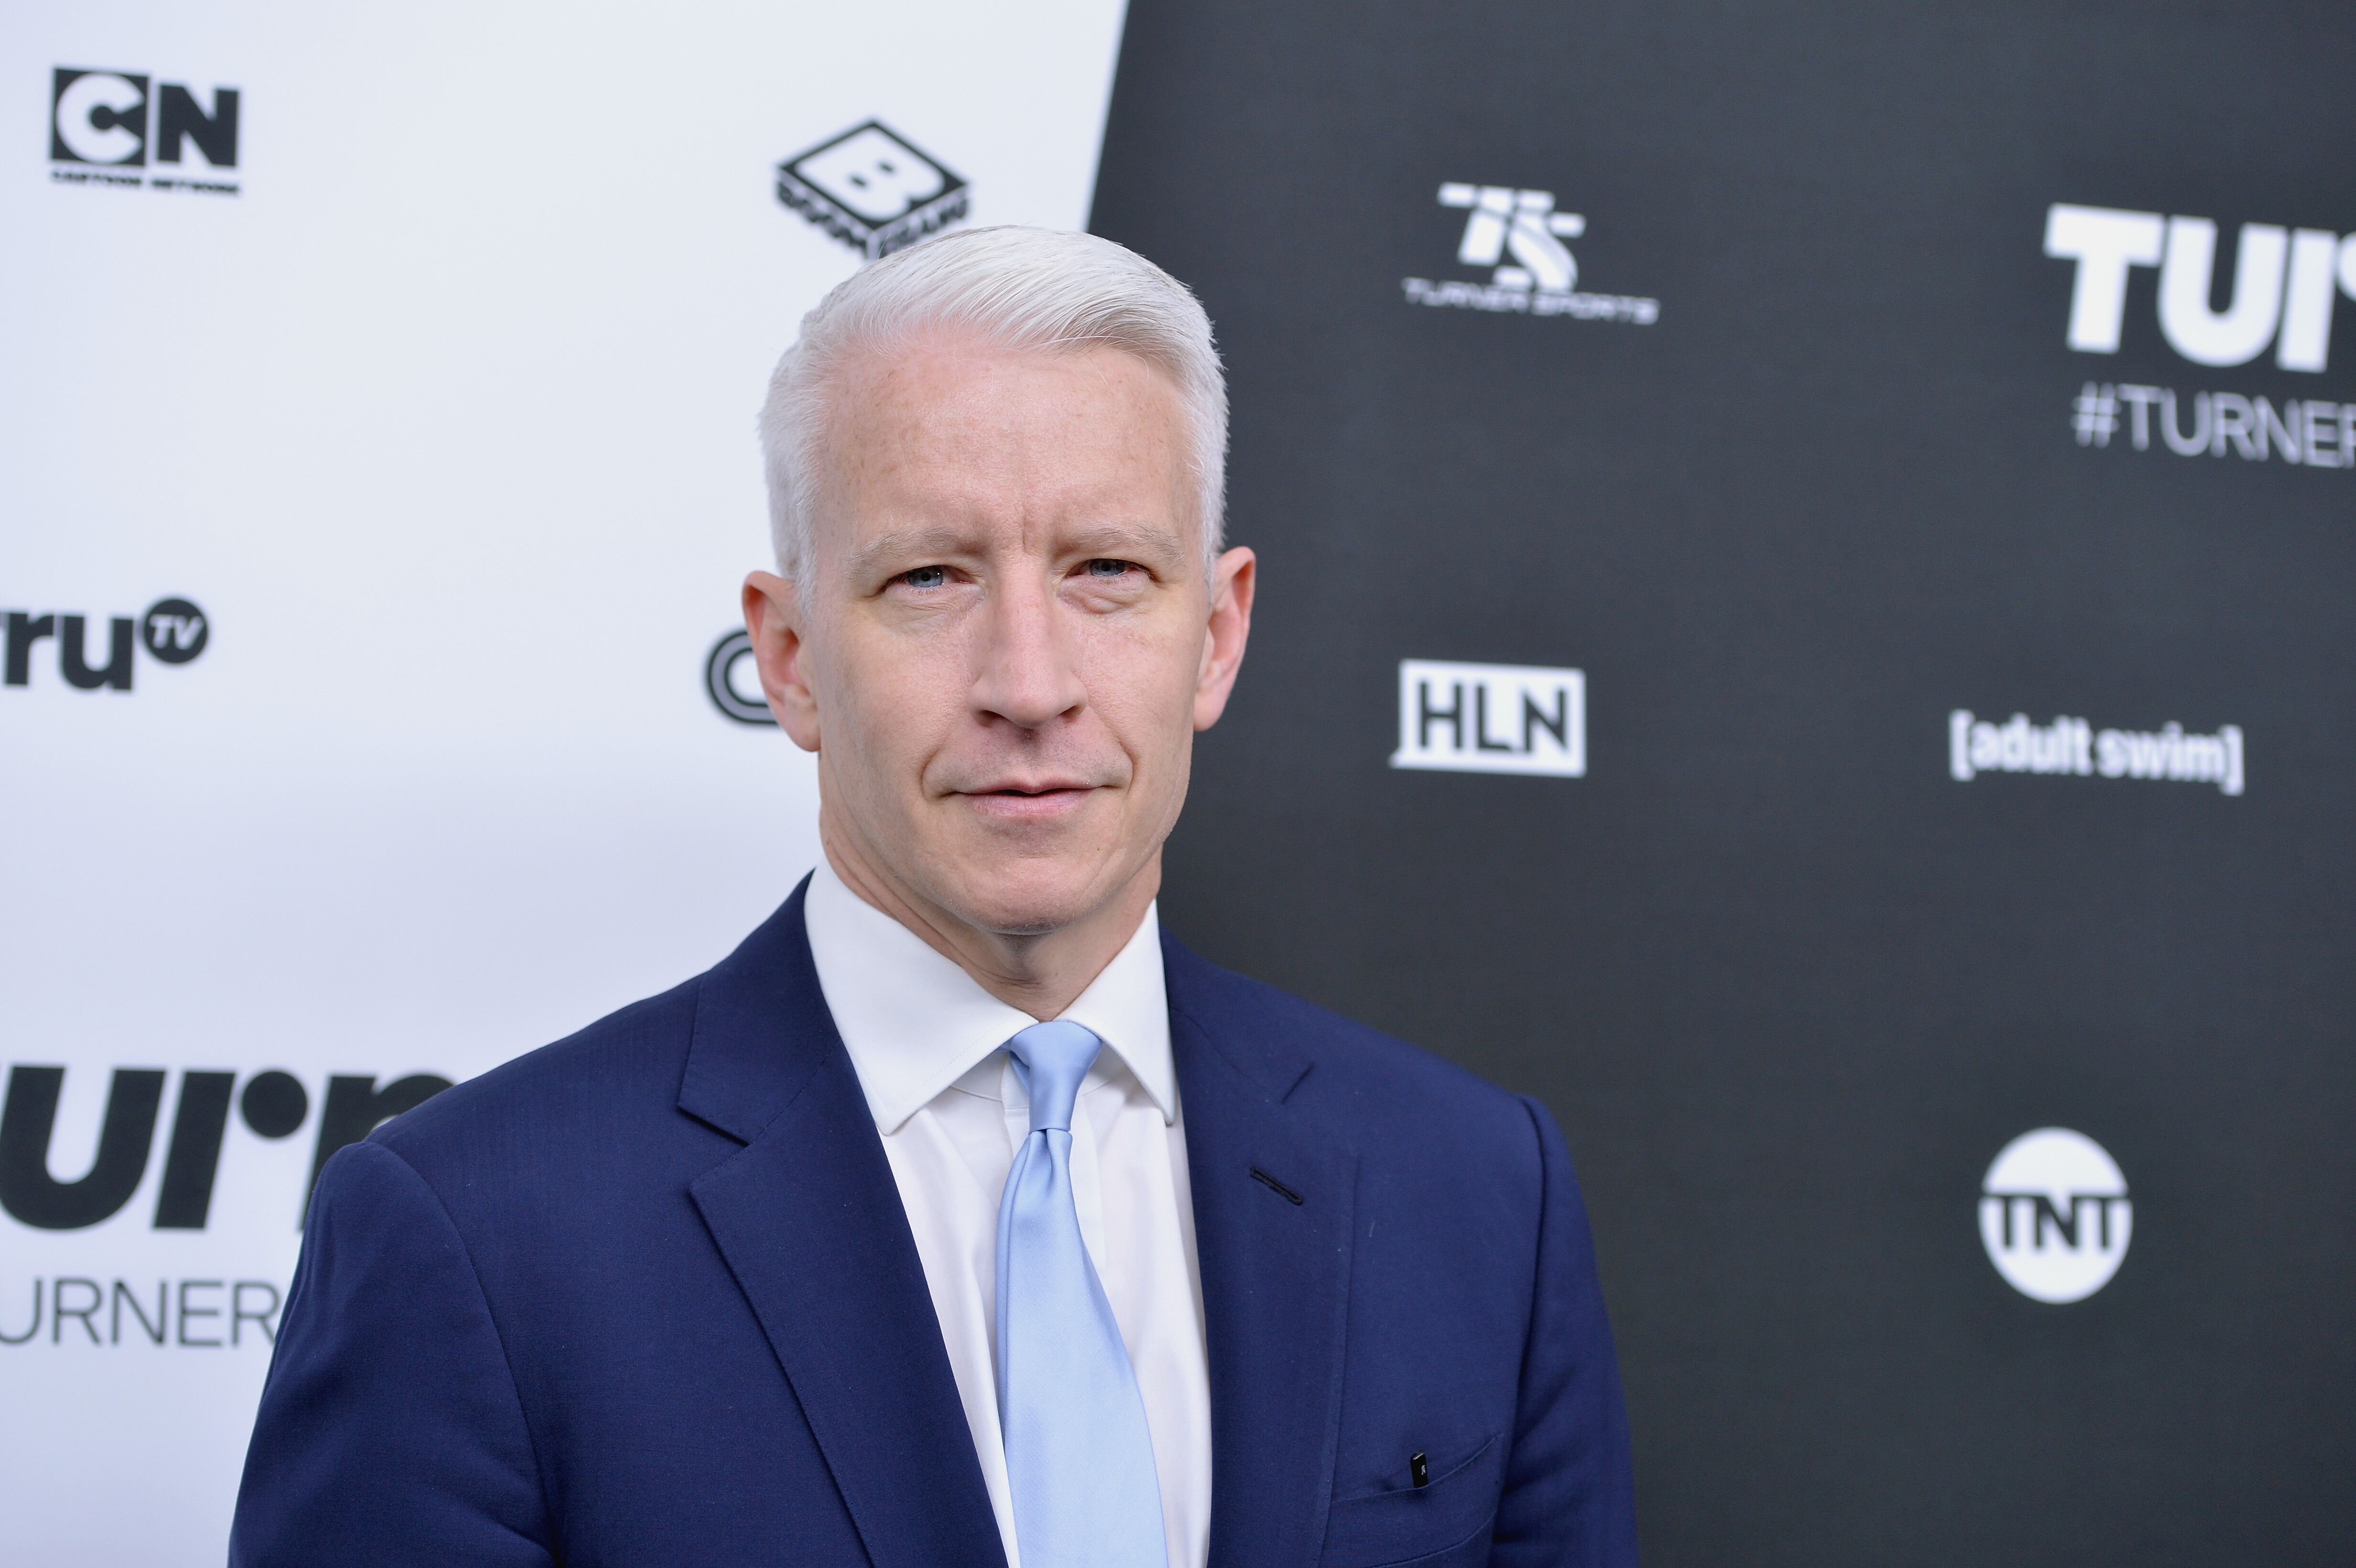 Anderson Cooper at the Turner Upfront held at Nick & Stef's Steakhouse on May 18, 2016. | Photo: Slaven Vlasic/Getty Images